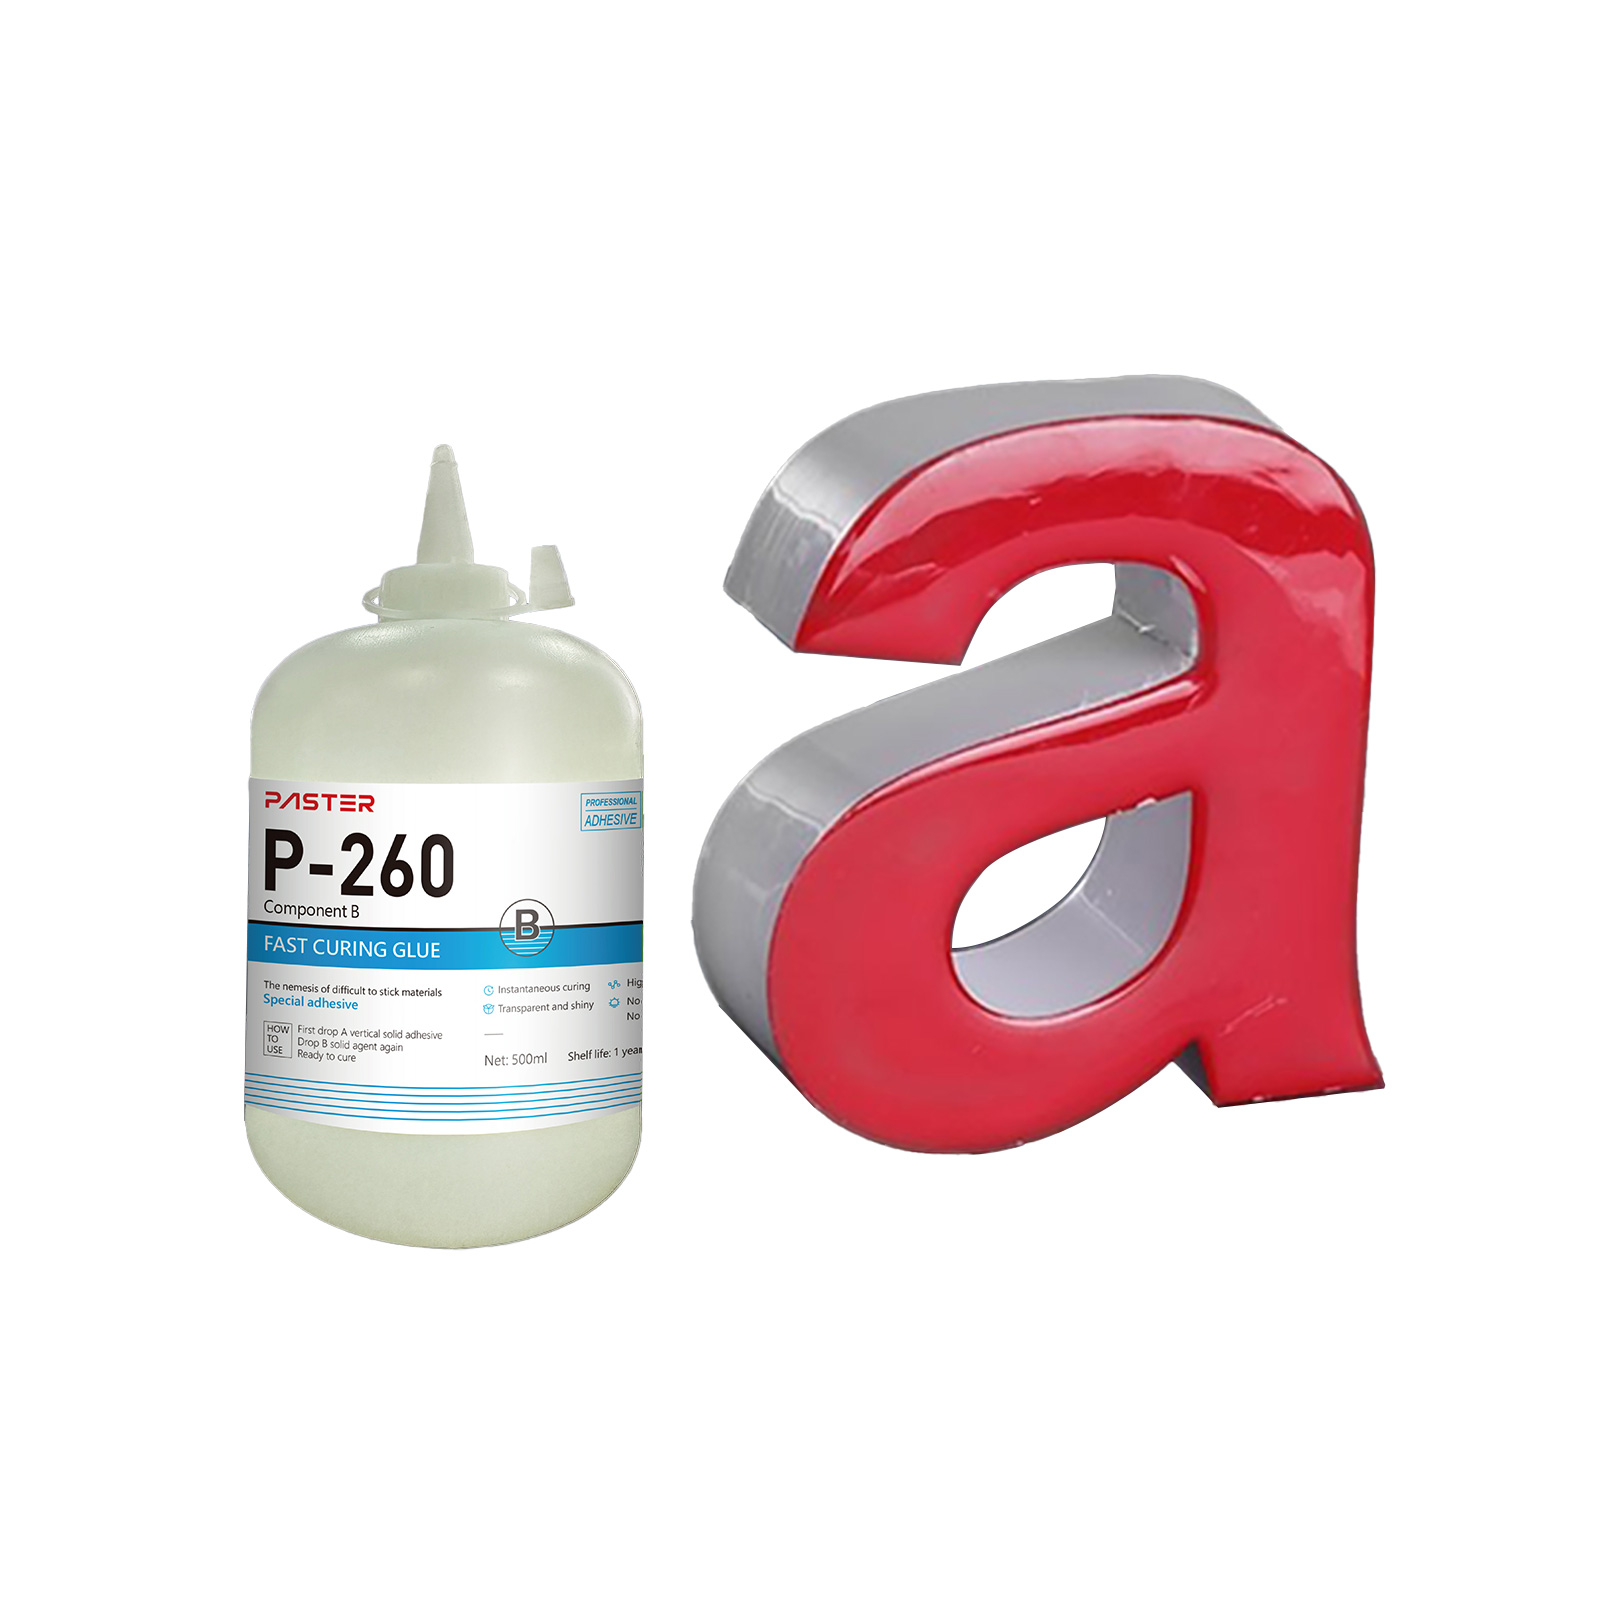 Sample-P-260B FAST CURING GLUE for channel letter